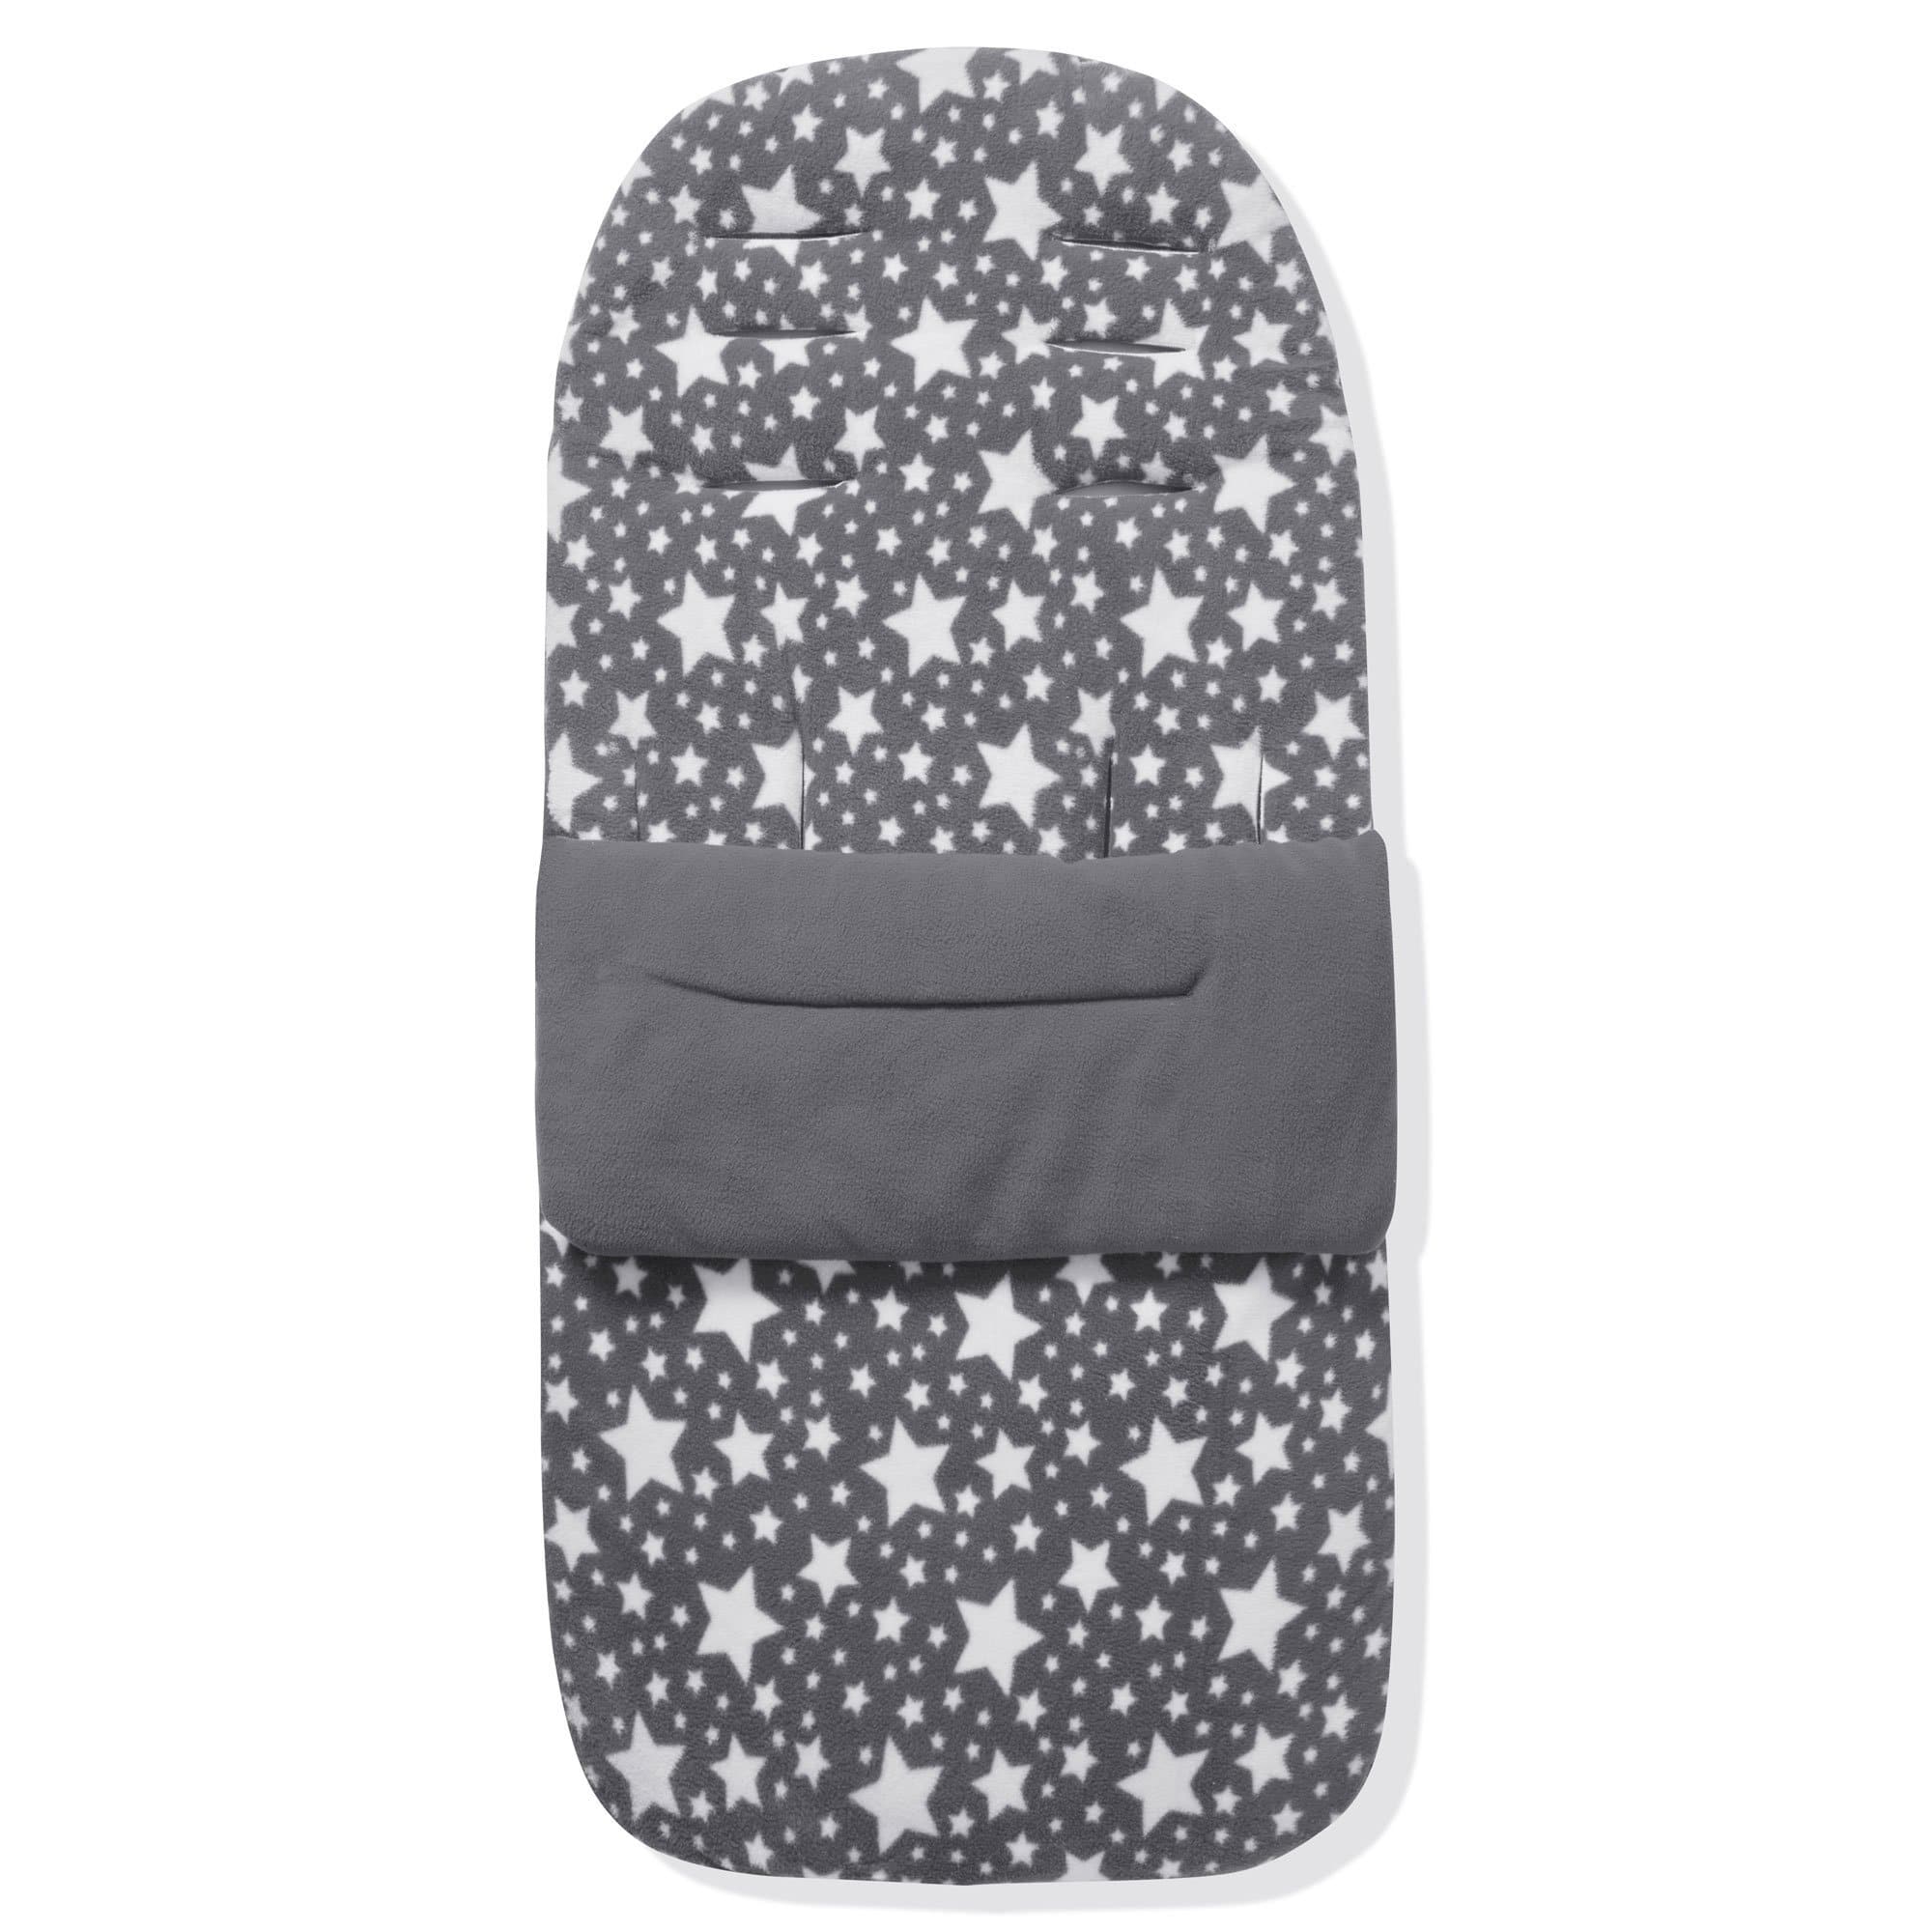 Fleece Footmuff / Cosy Toes Compatible with Norton - For Your Little One